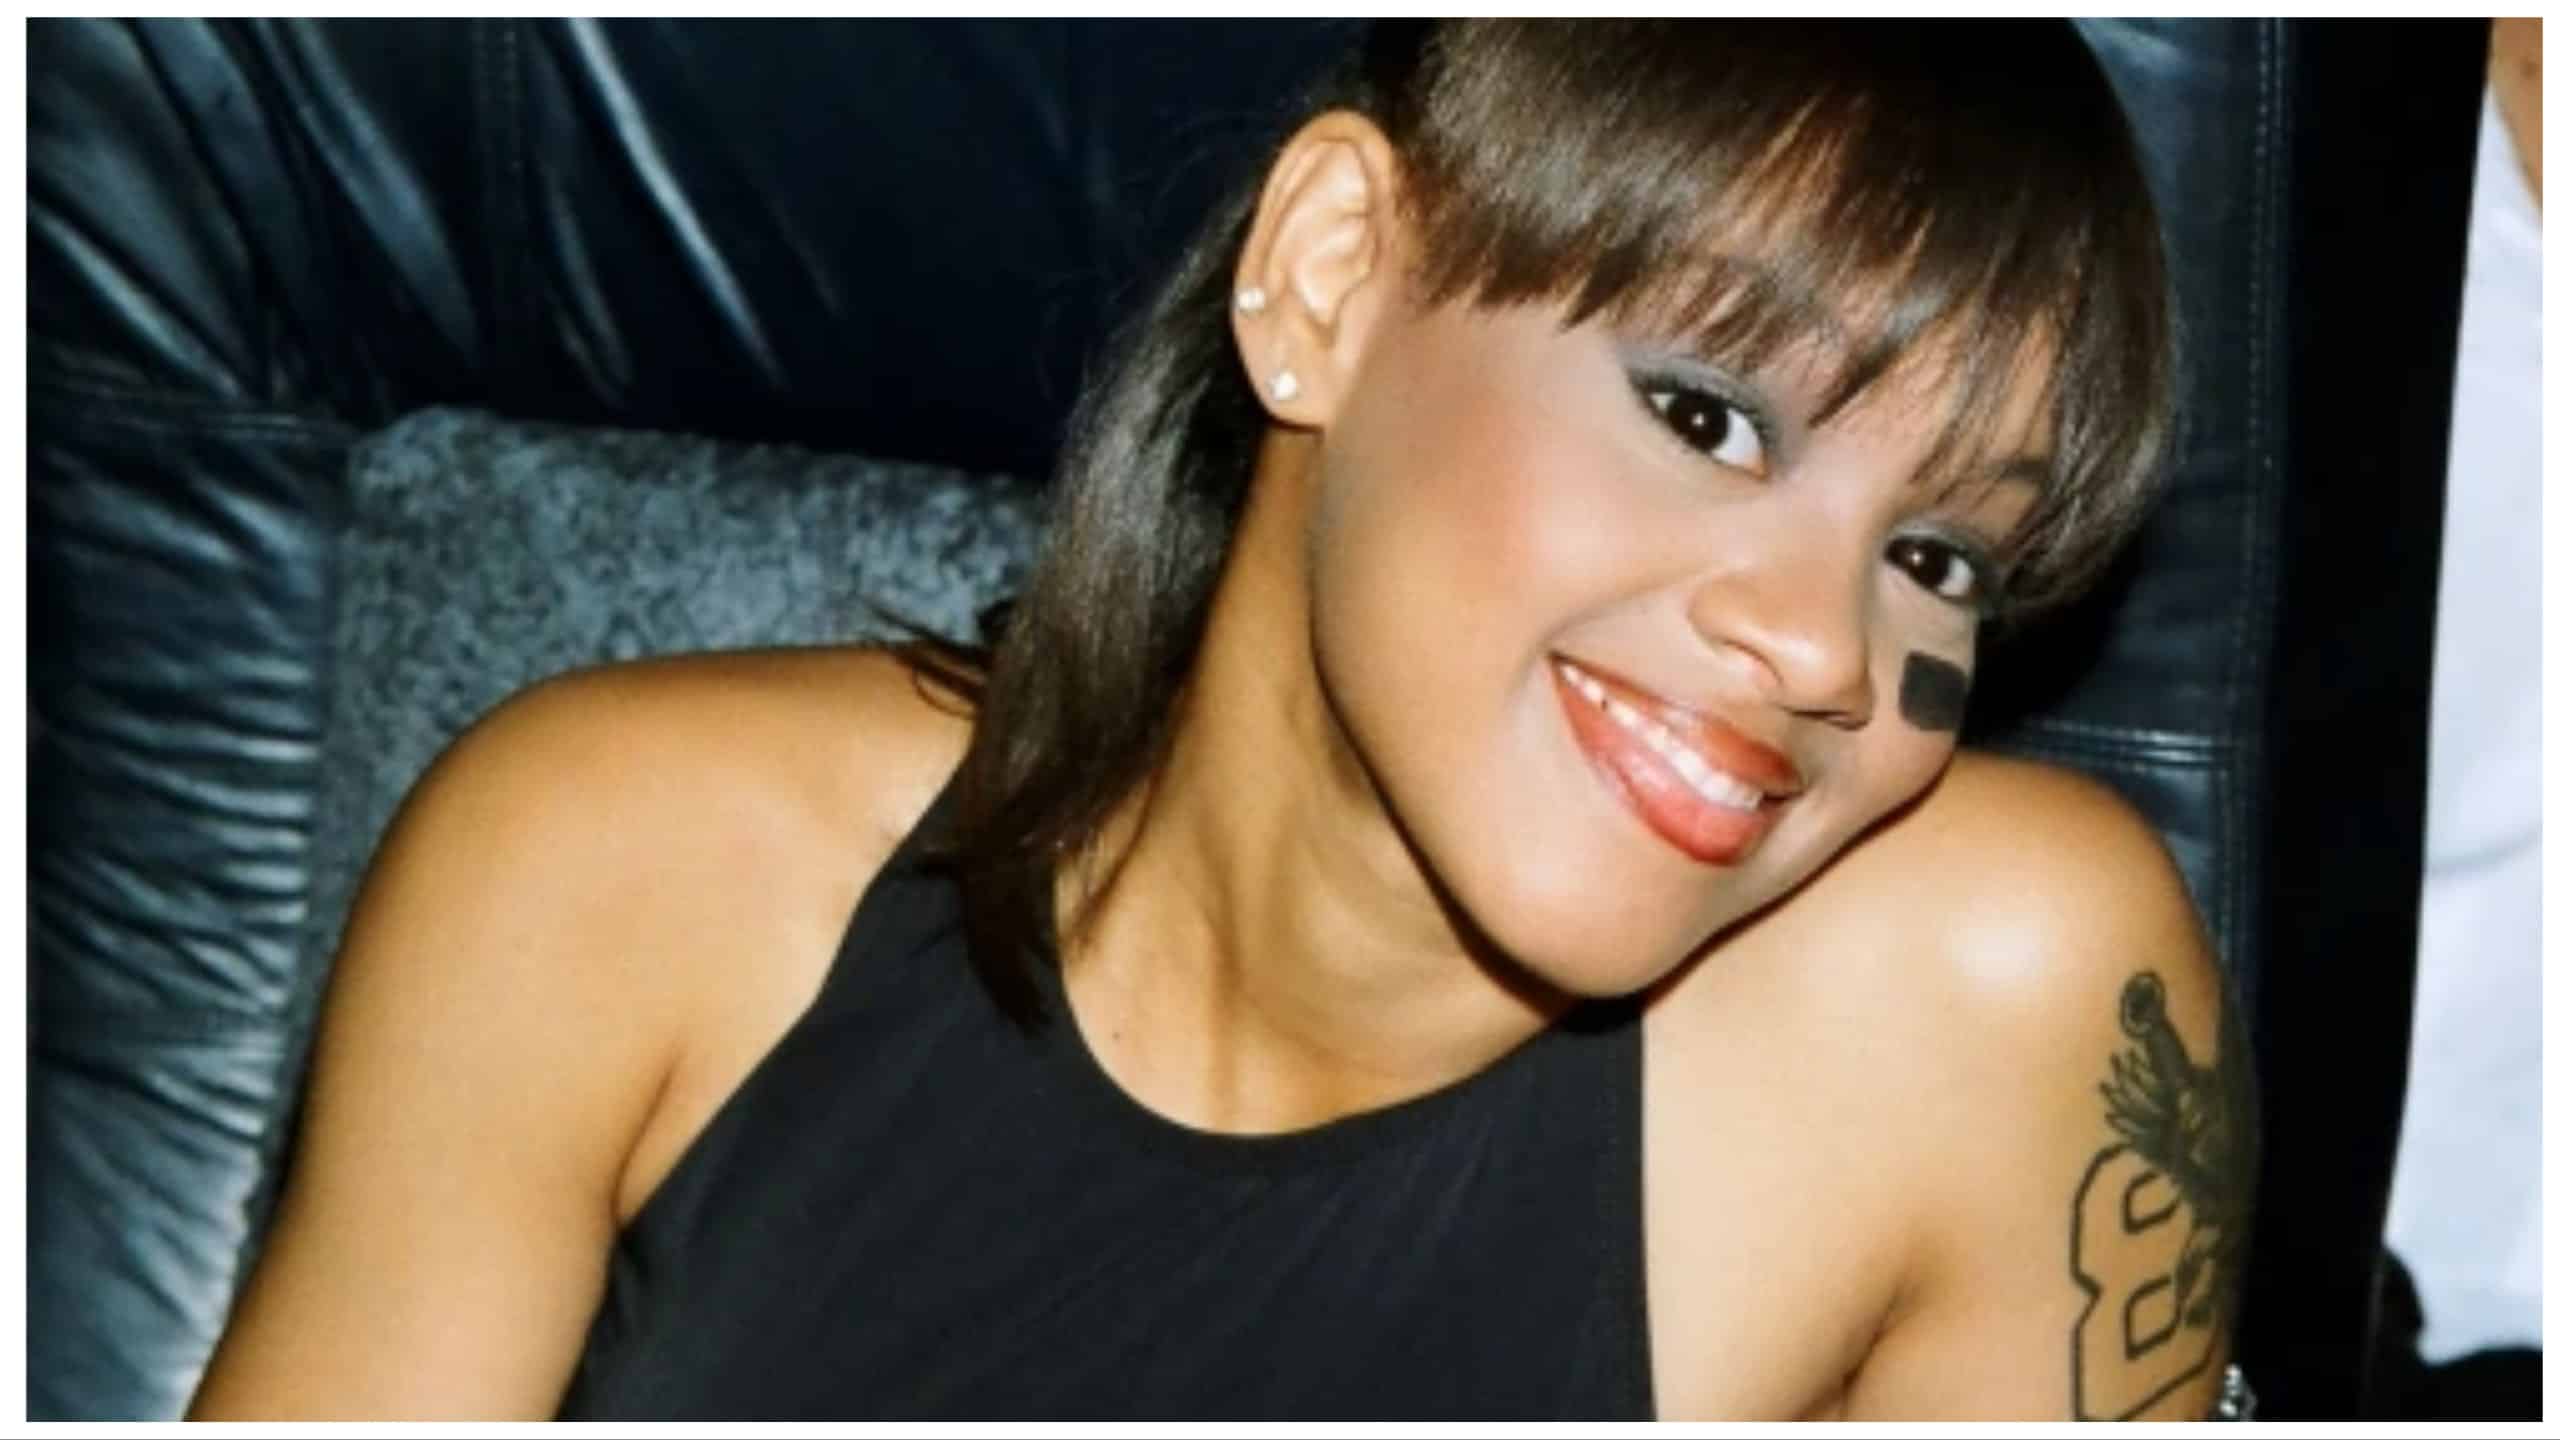 what happened to left eye